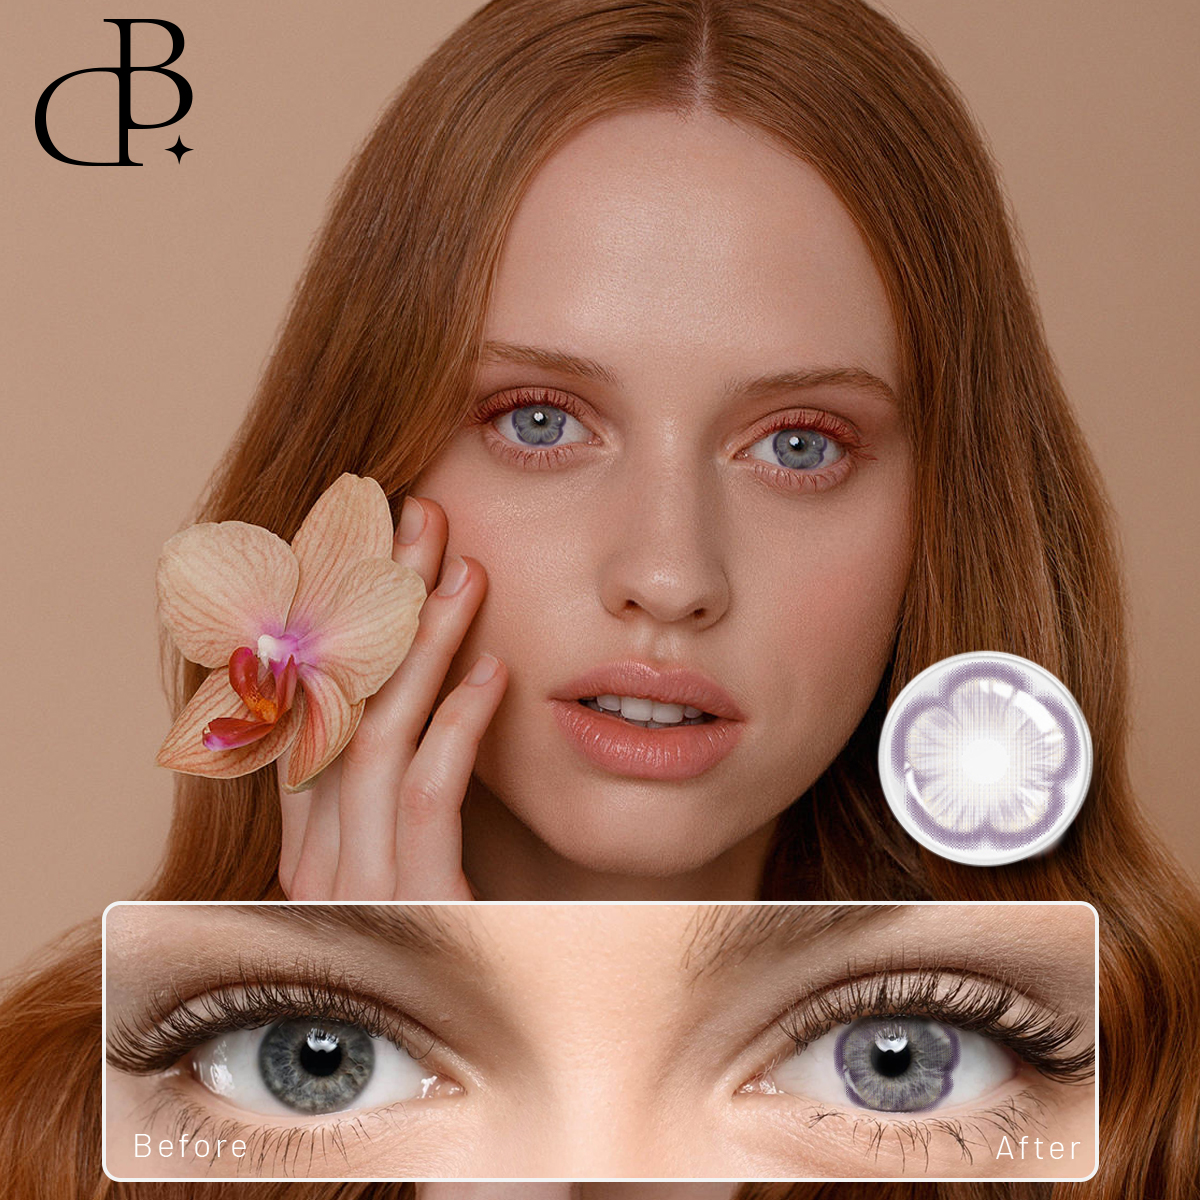 DBeyes OEM special shaped violet petals contactlenses with packaging box prescription contact lens